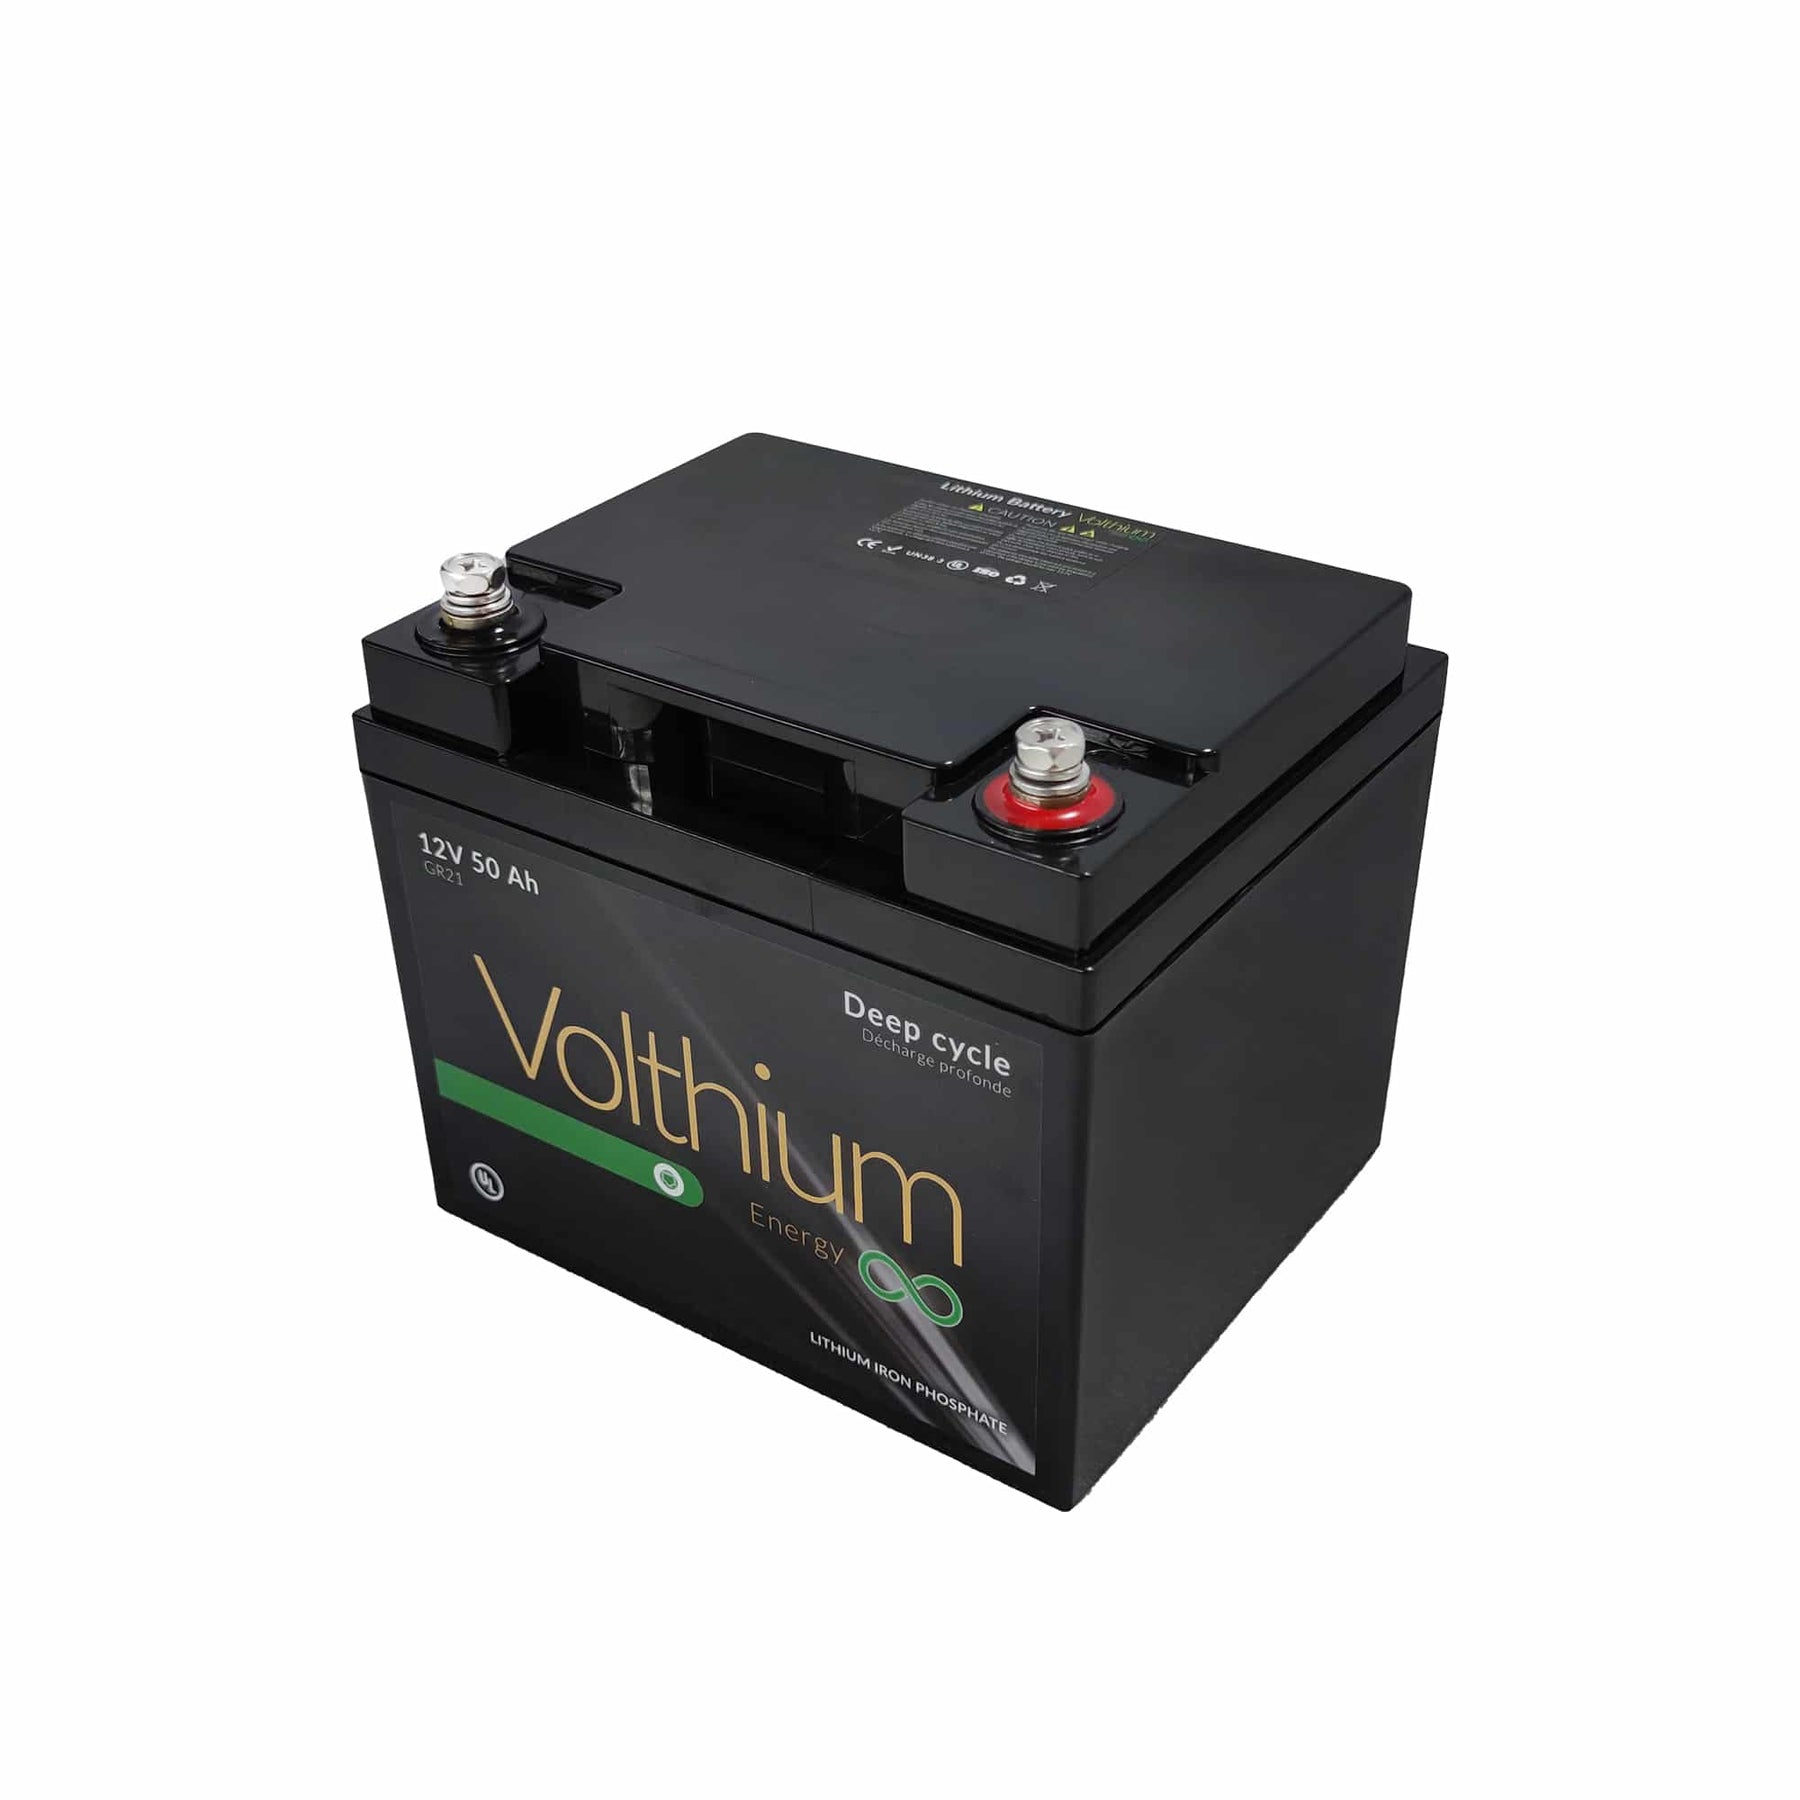 Volthium Lithium Marine Battery 12V 50Ah - Low Temp Cut Off Protection